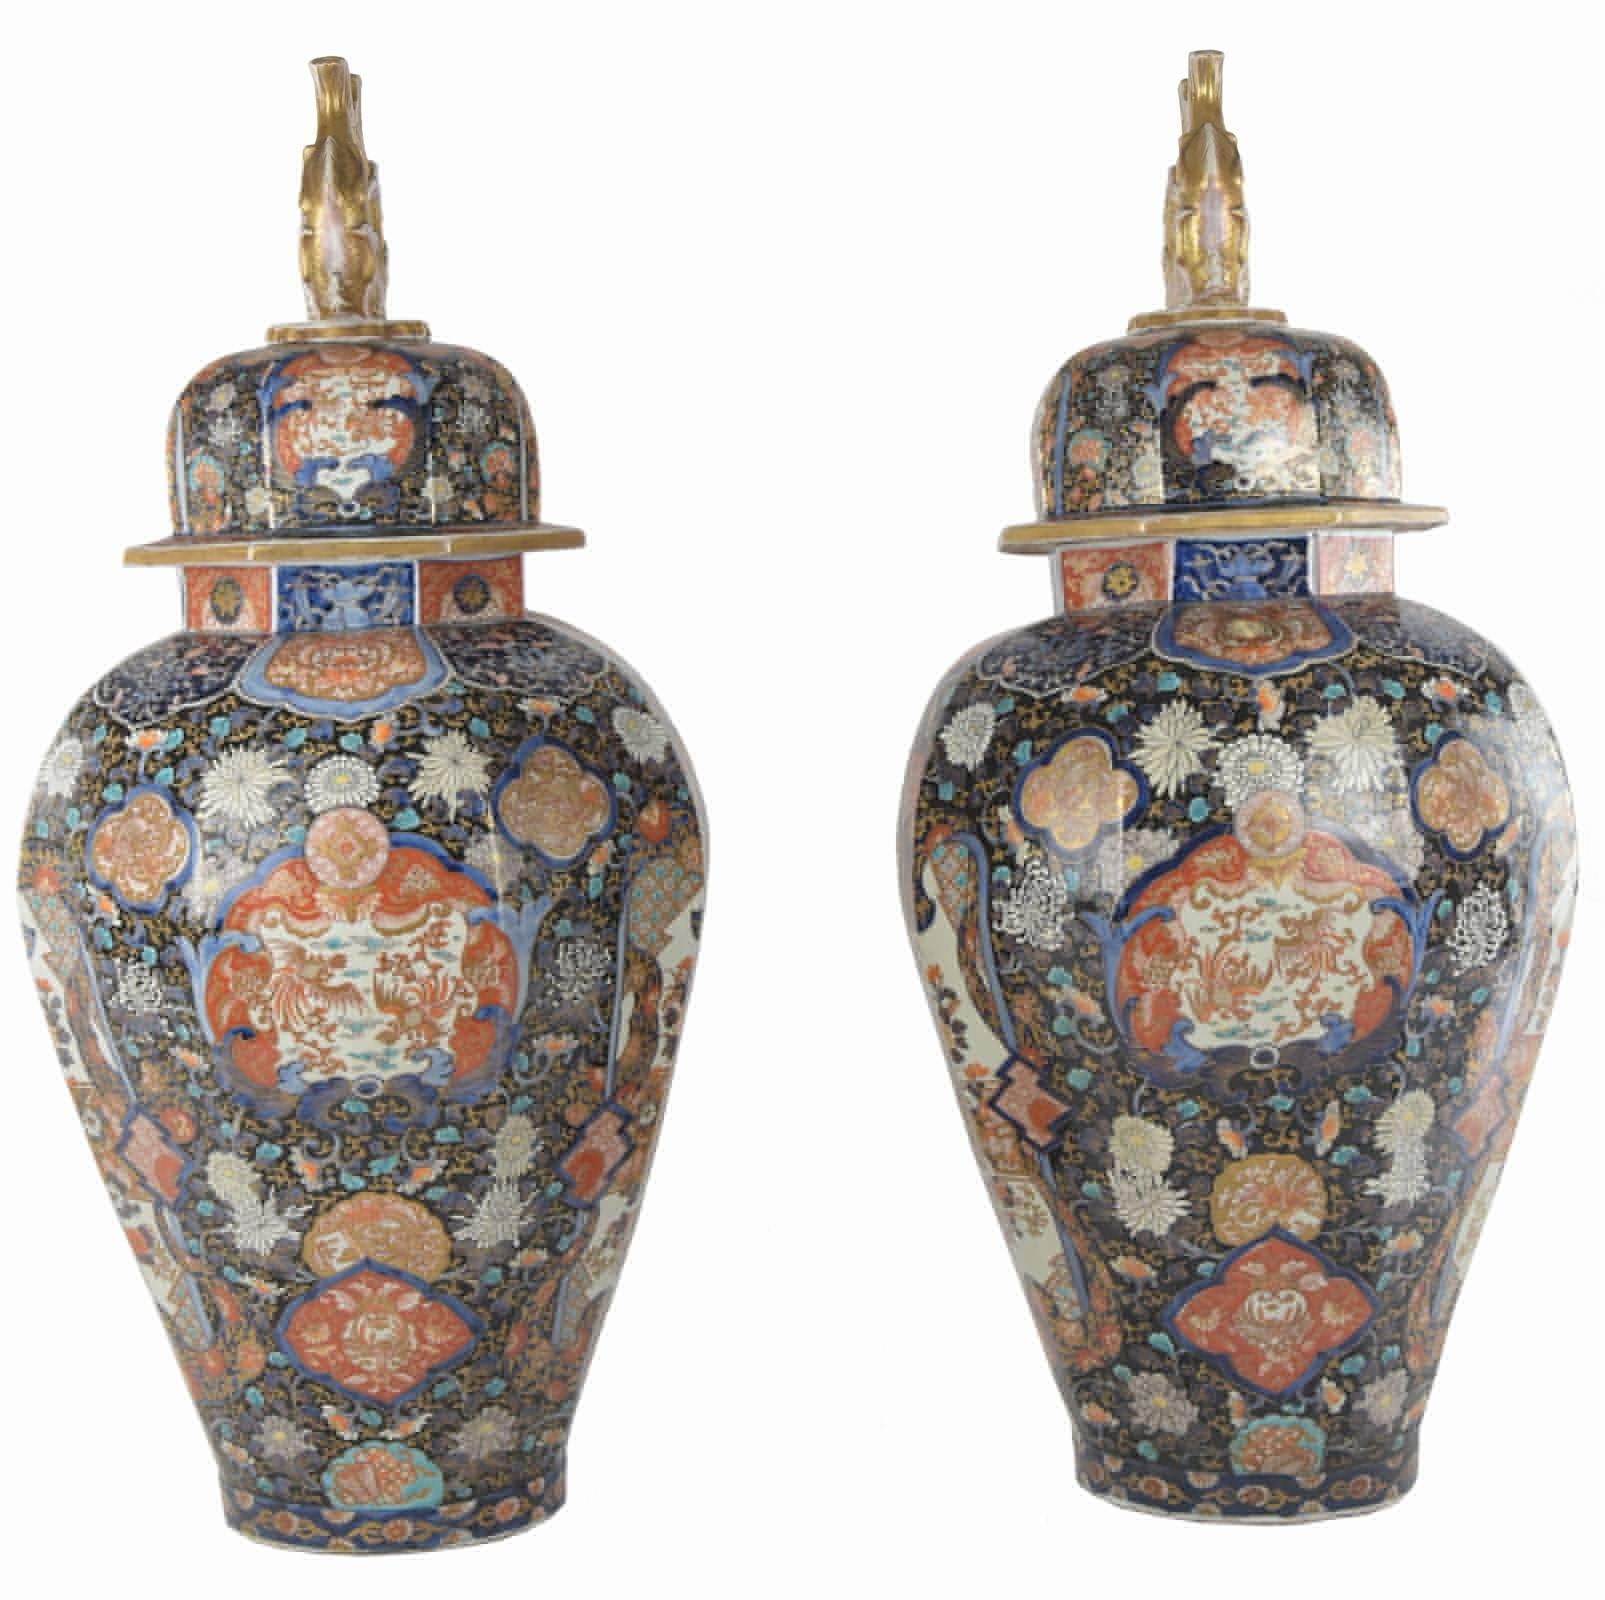 Two large and matching Japanese Imari baluster vases with covers, from the estate of President Franklin Delano Roosevelt, listed as item number 